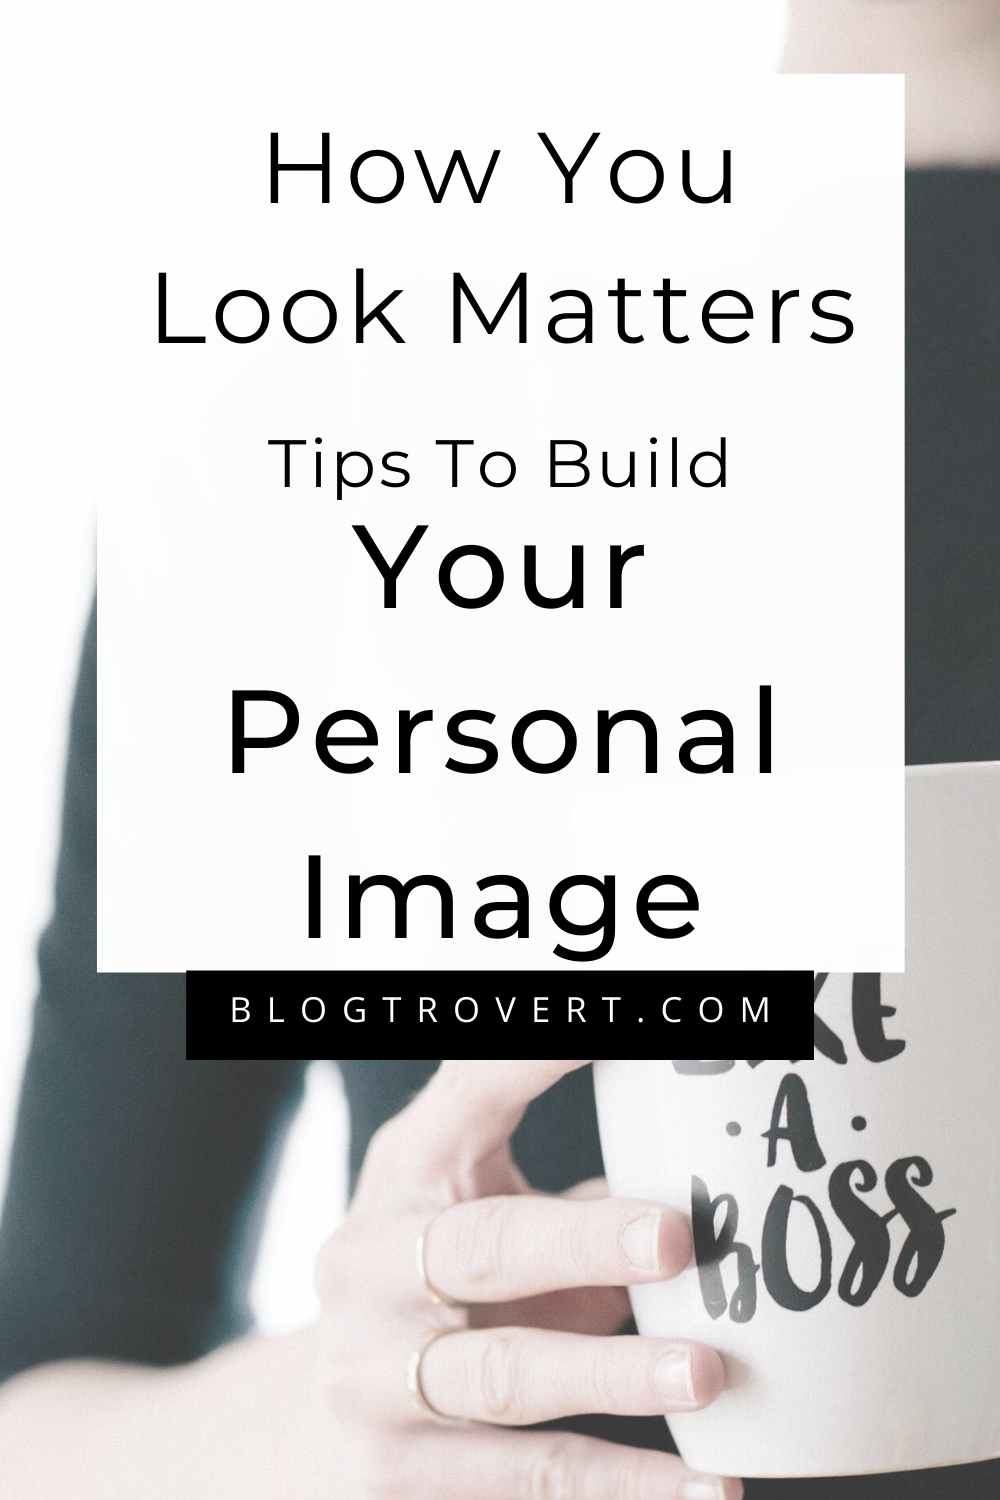 How To Build Your Personal Image; 6 Helpful Steps 2